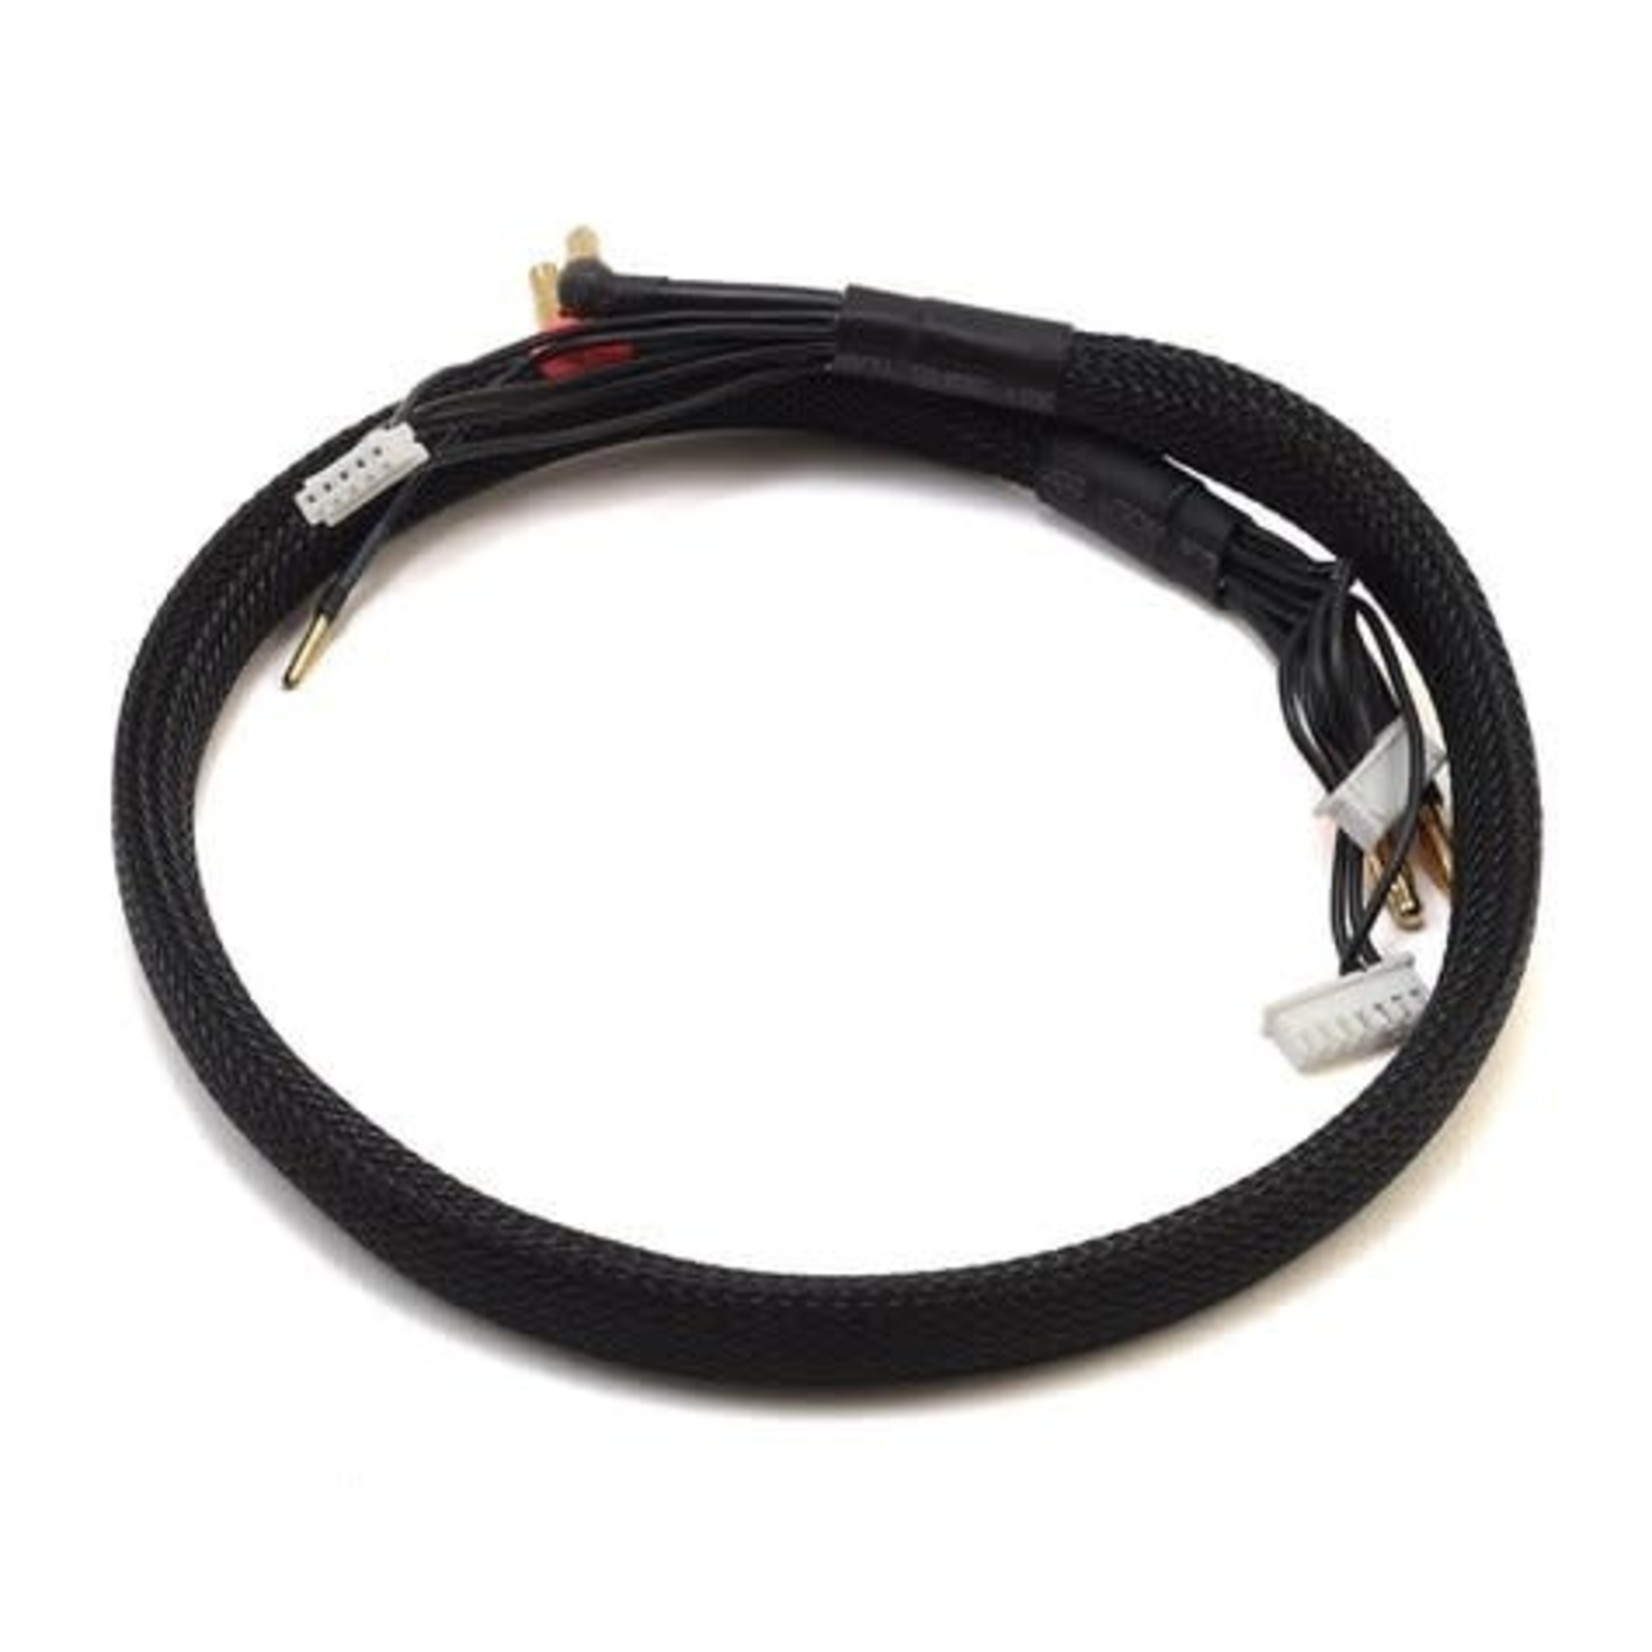 Maclan Maclan Max Current 2S/4S Charge Cable w/4mm & 5mm Bullet Connector #MCL4171